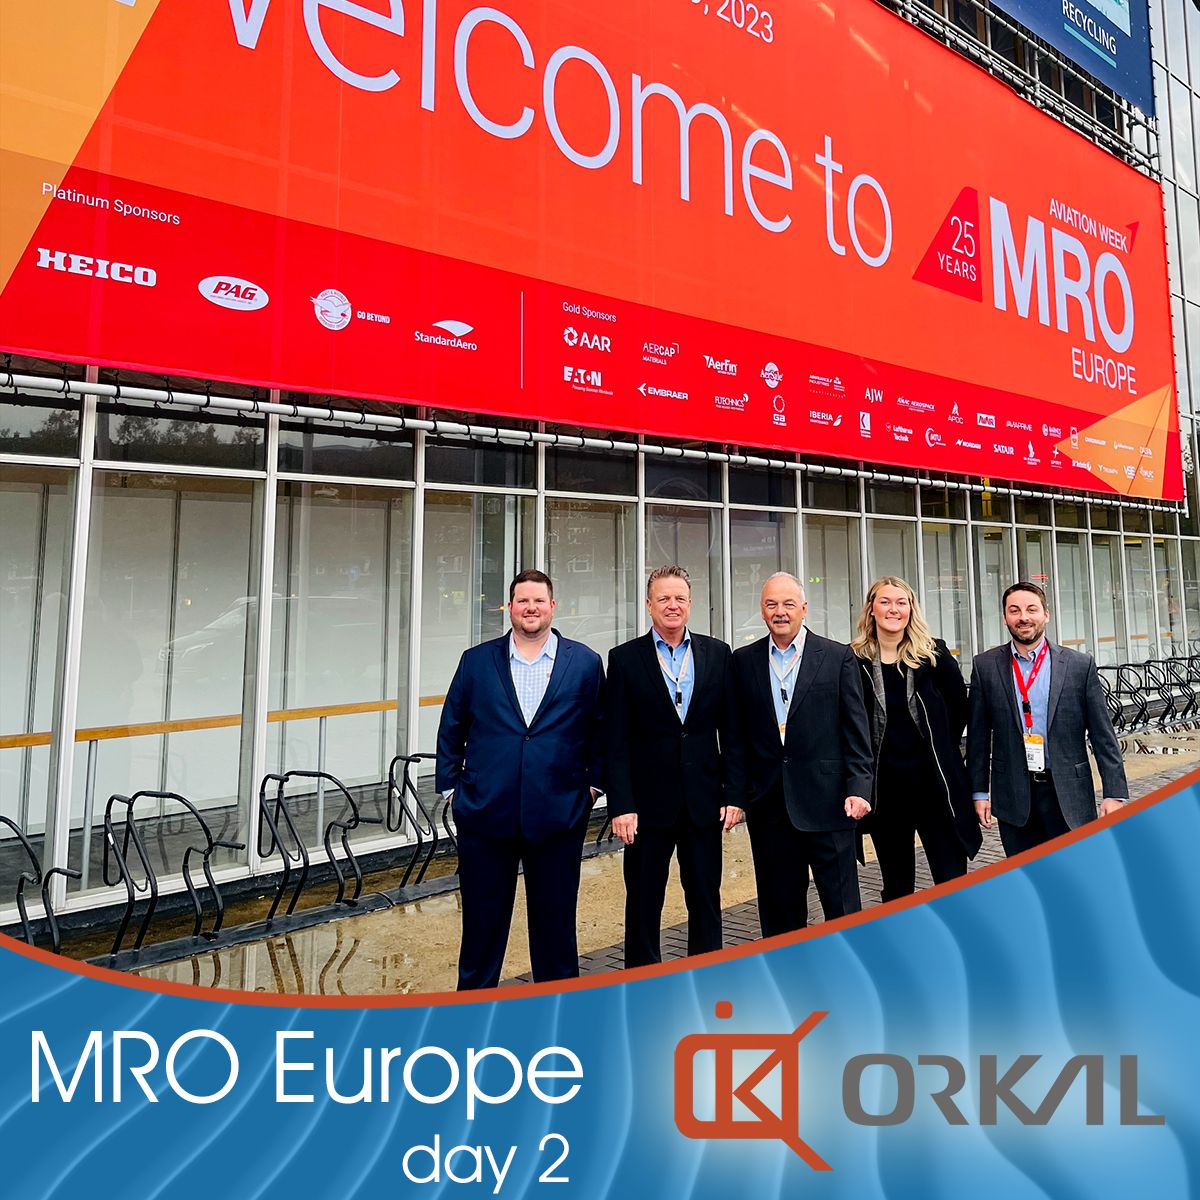 five individuals posing in front of a large "welcome to mro europe 2023, day two" banner at an exhibit venue.